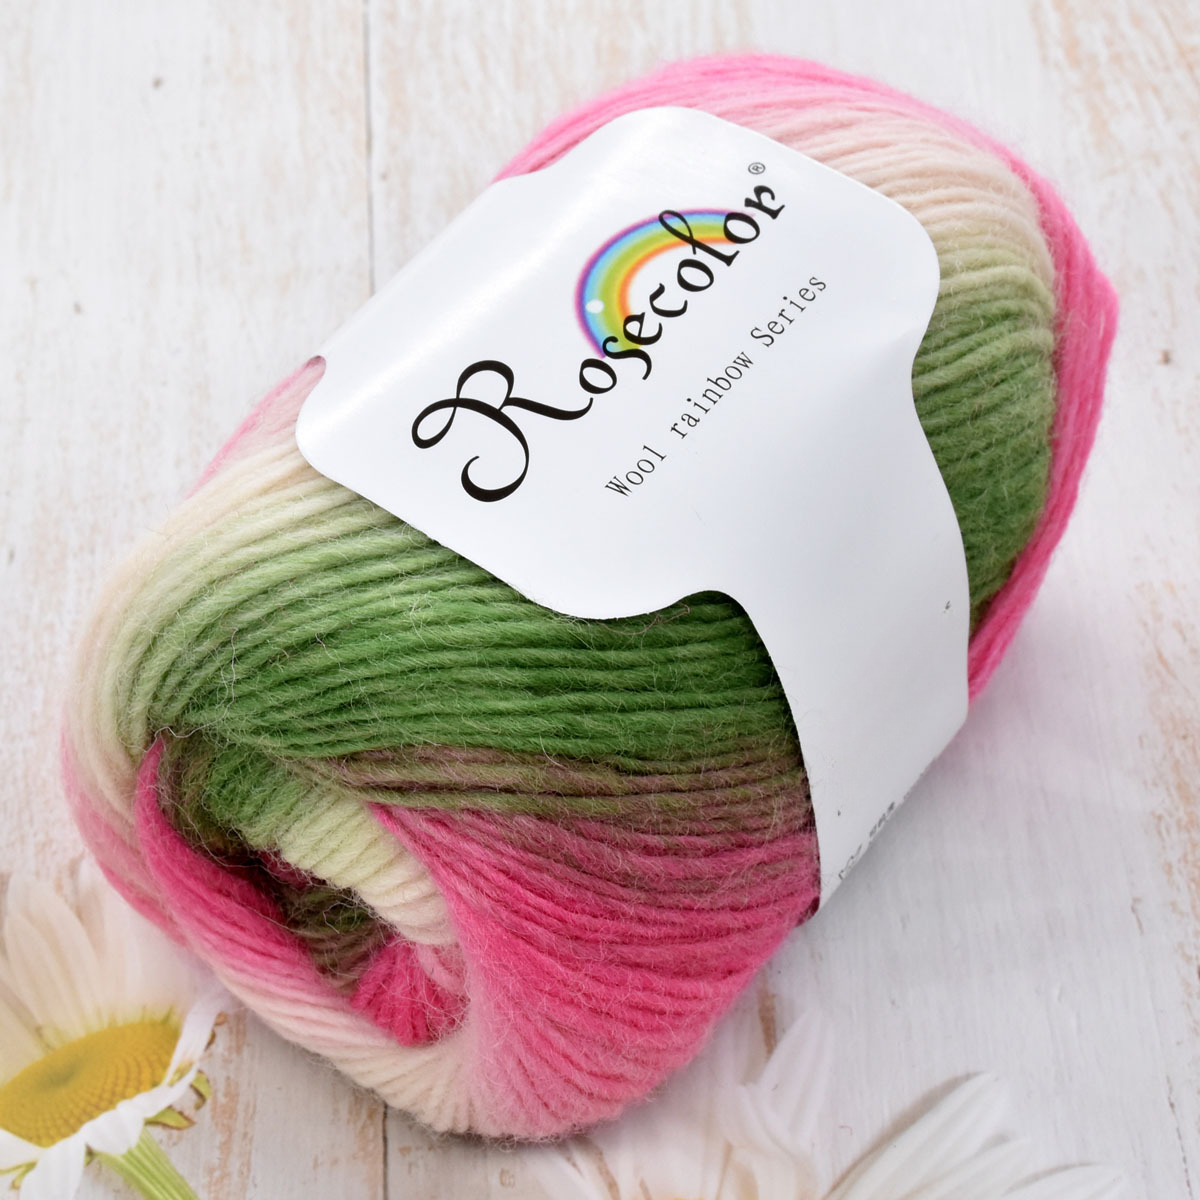 500g/lot Rainbow wool For Knitting Yarn Hand-Knitted Hook Needle Wool Yarn  For Hand Knitting Thread gran Section stained